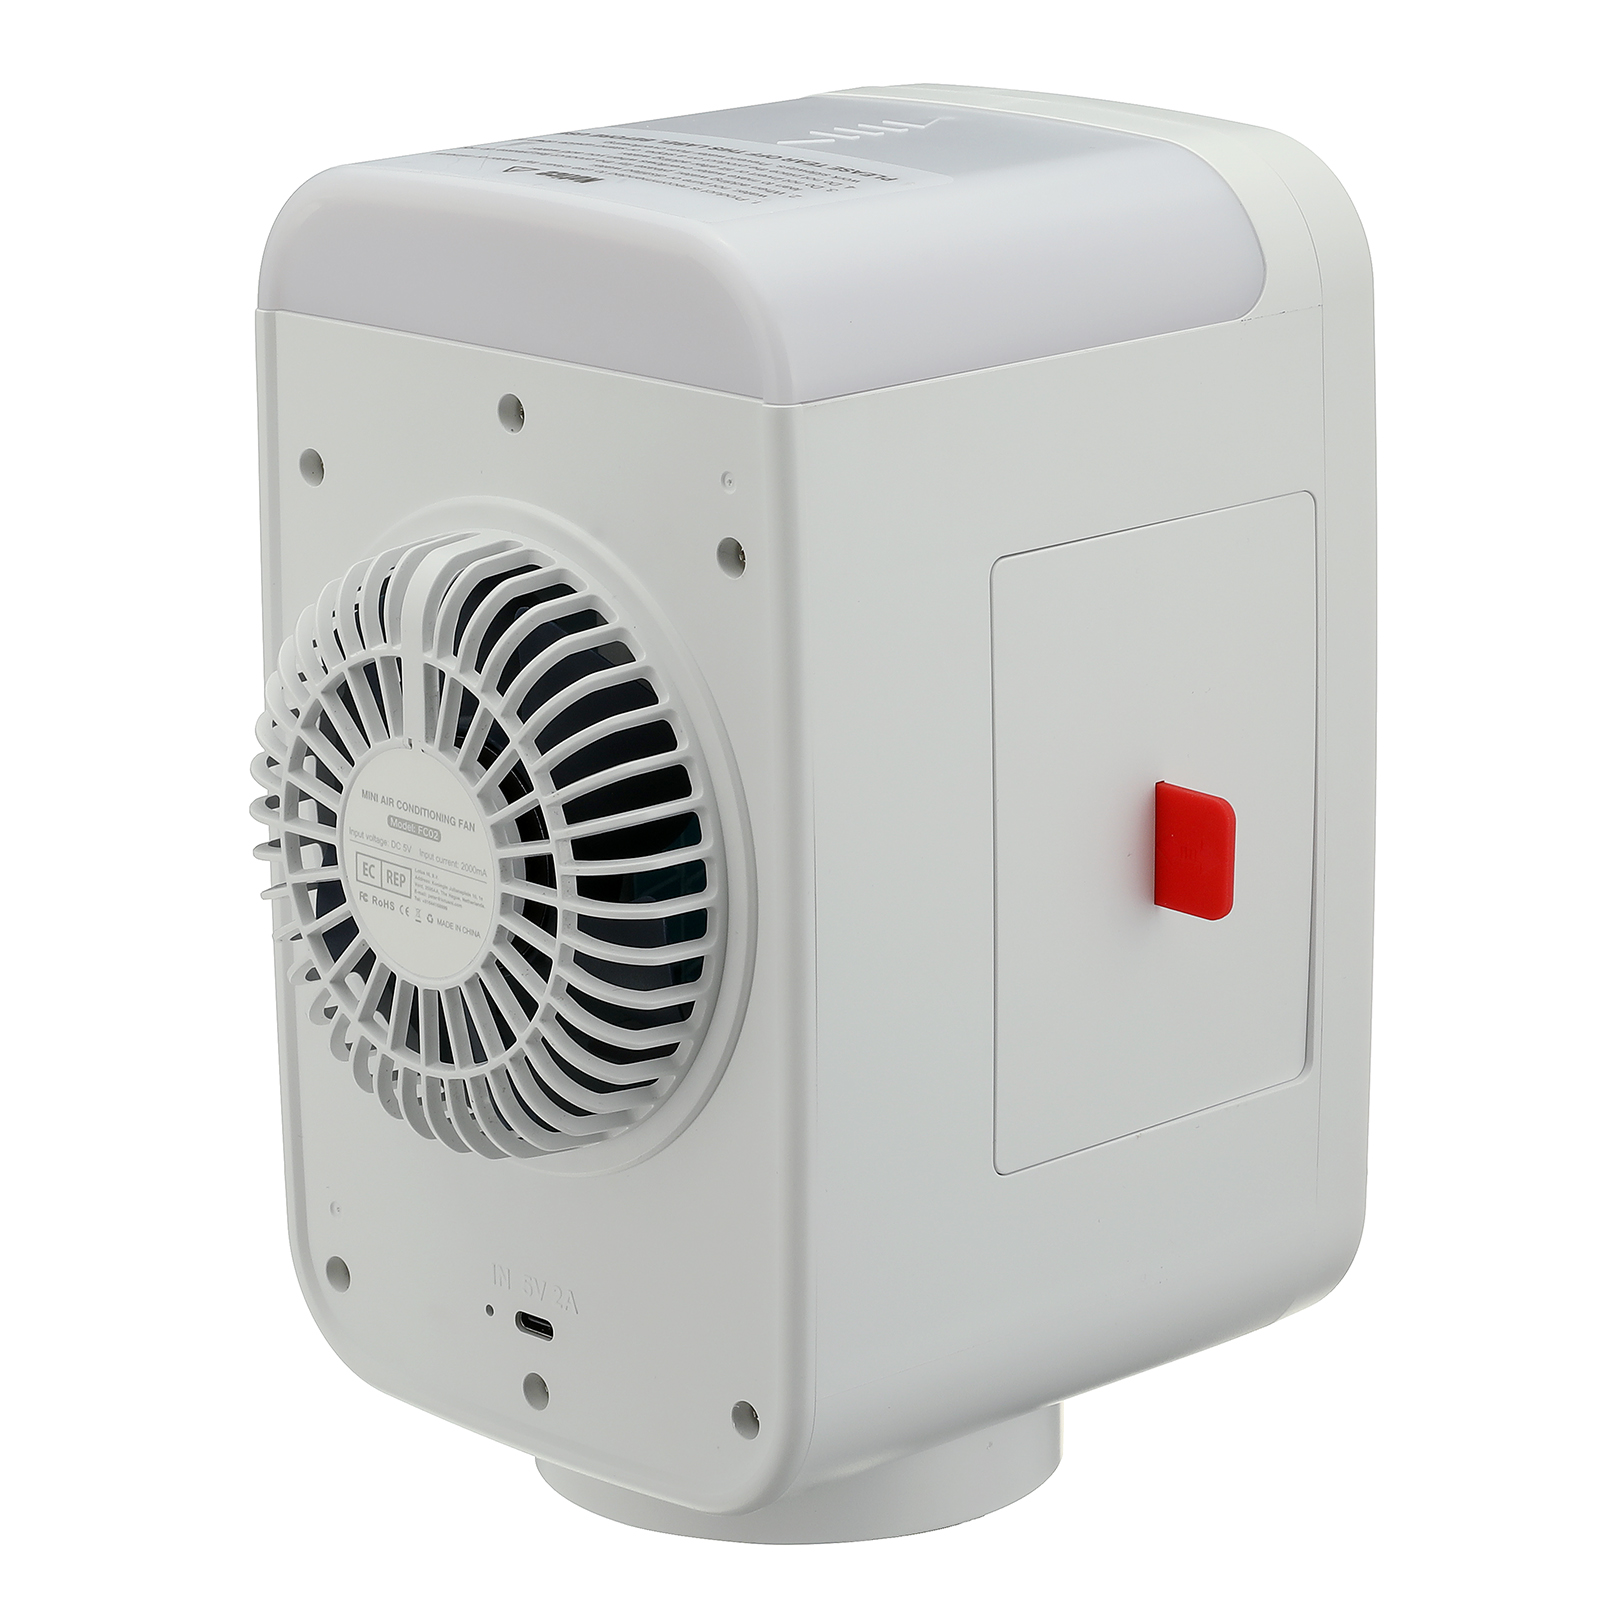 5-in-1-Mini-Air-Cooler-3-Wind-Speed-Adjustment-120deg-Wide-Angle-Rotation-Air-Humidification-Conditi-1885105-16